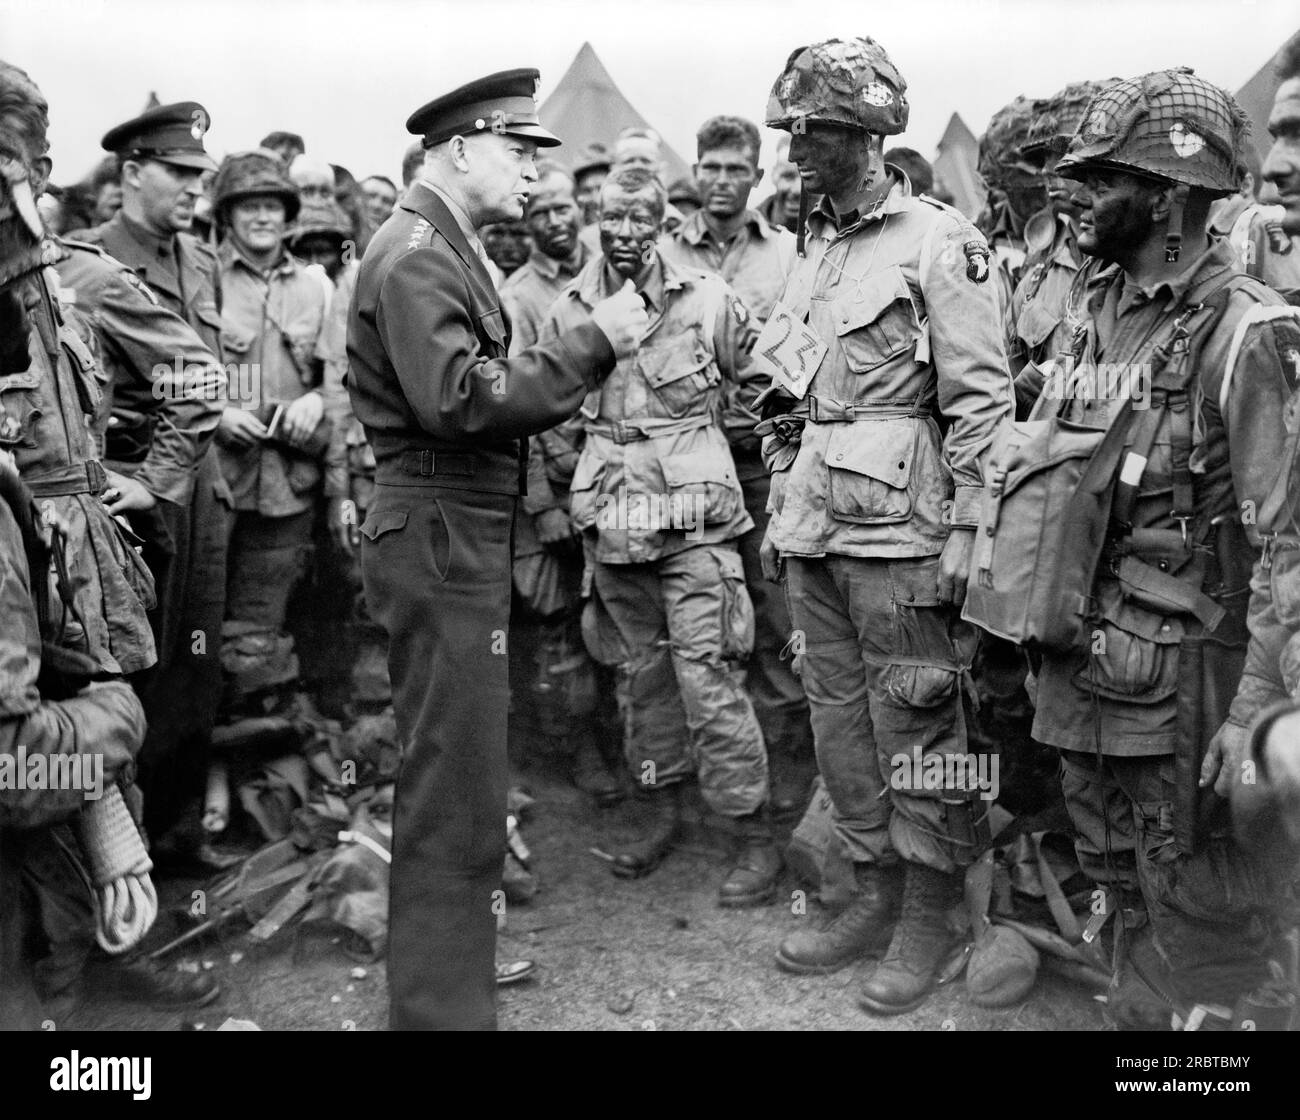 Berkshire, England:   June 5, 1944 General Dwight D. Eisenhower talking with American paratroopers on the evening of June 5, 1944, as they prepared for the Invasion of Normandy. The men are part of Company E, 502nd Parachute Infantry Regiment, at the 101st Airborne Division's camp in Greenham Common. Photo includes Sgt. Russell Wilmarth, behind Eisenhower's chin, Lt. Wallace C. Strobel with a '23' tag, Ralph 'Bud' Thomas, to the left of Strobel, (and probably Corporal Donald E. Kruger, in front row, far right, wearing a musette bag on his chest Stock Photo